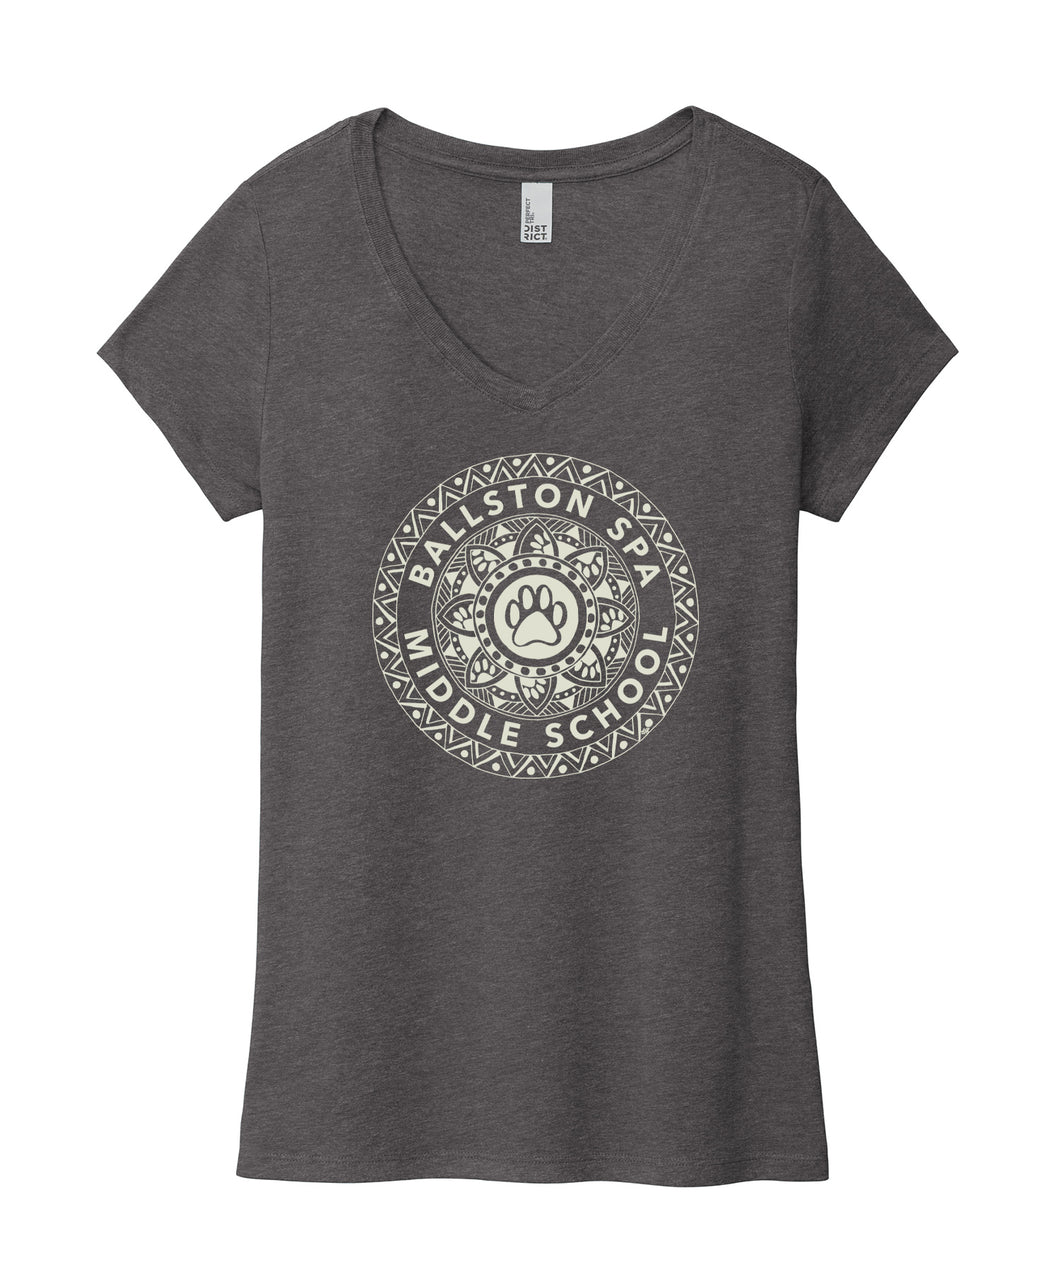 BSCSD Middle School Women's V-neck T-shirt - Grey (provides 12 meals)